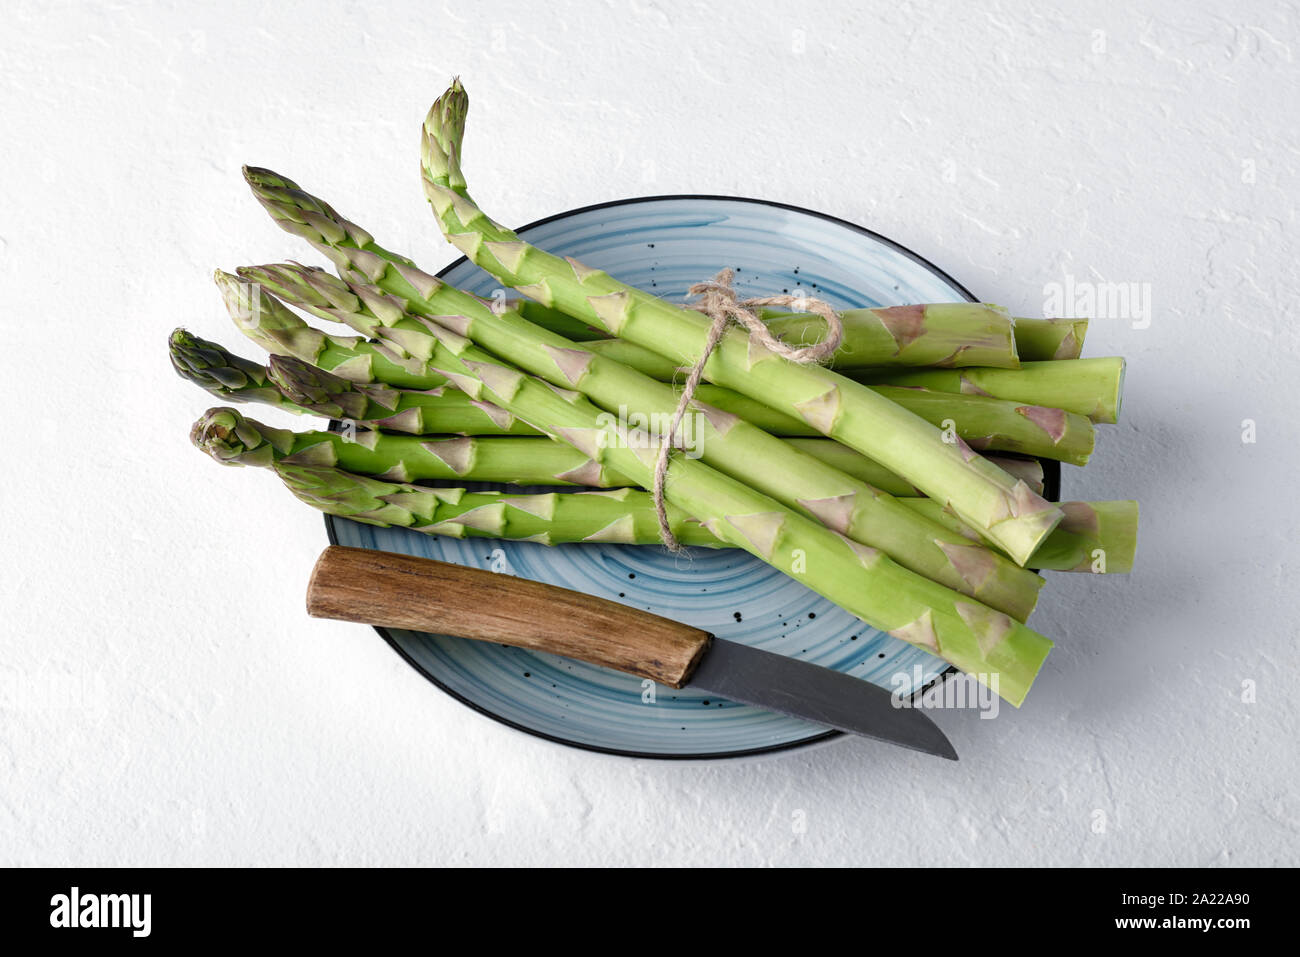 Green asparagus sprout on blue plate on white table. Food photography Stock Photo